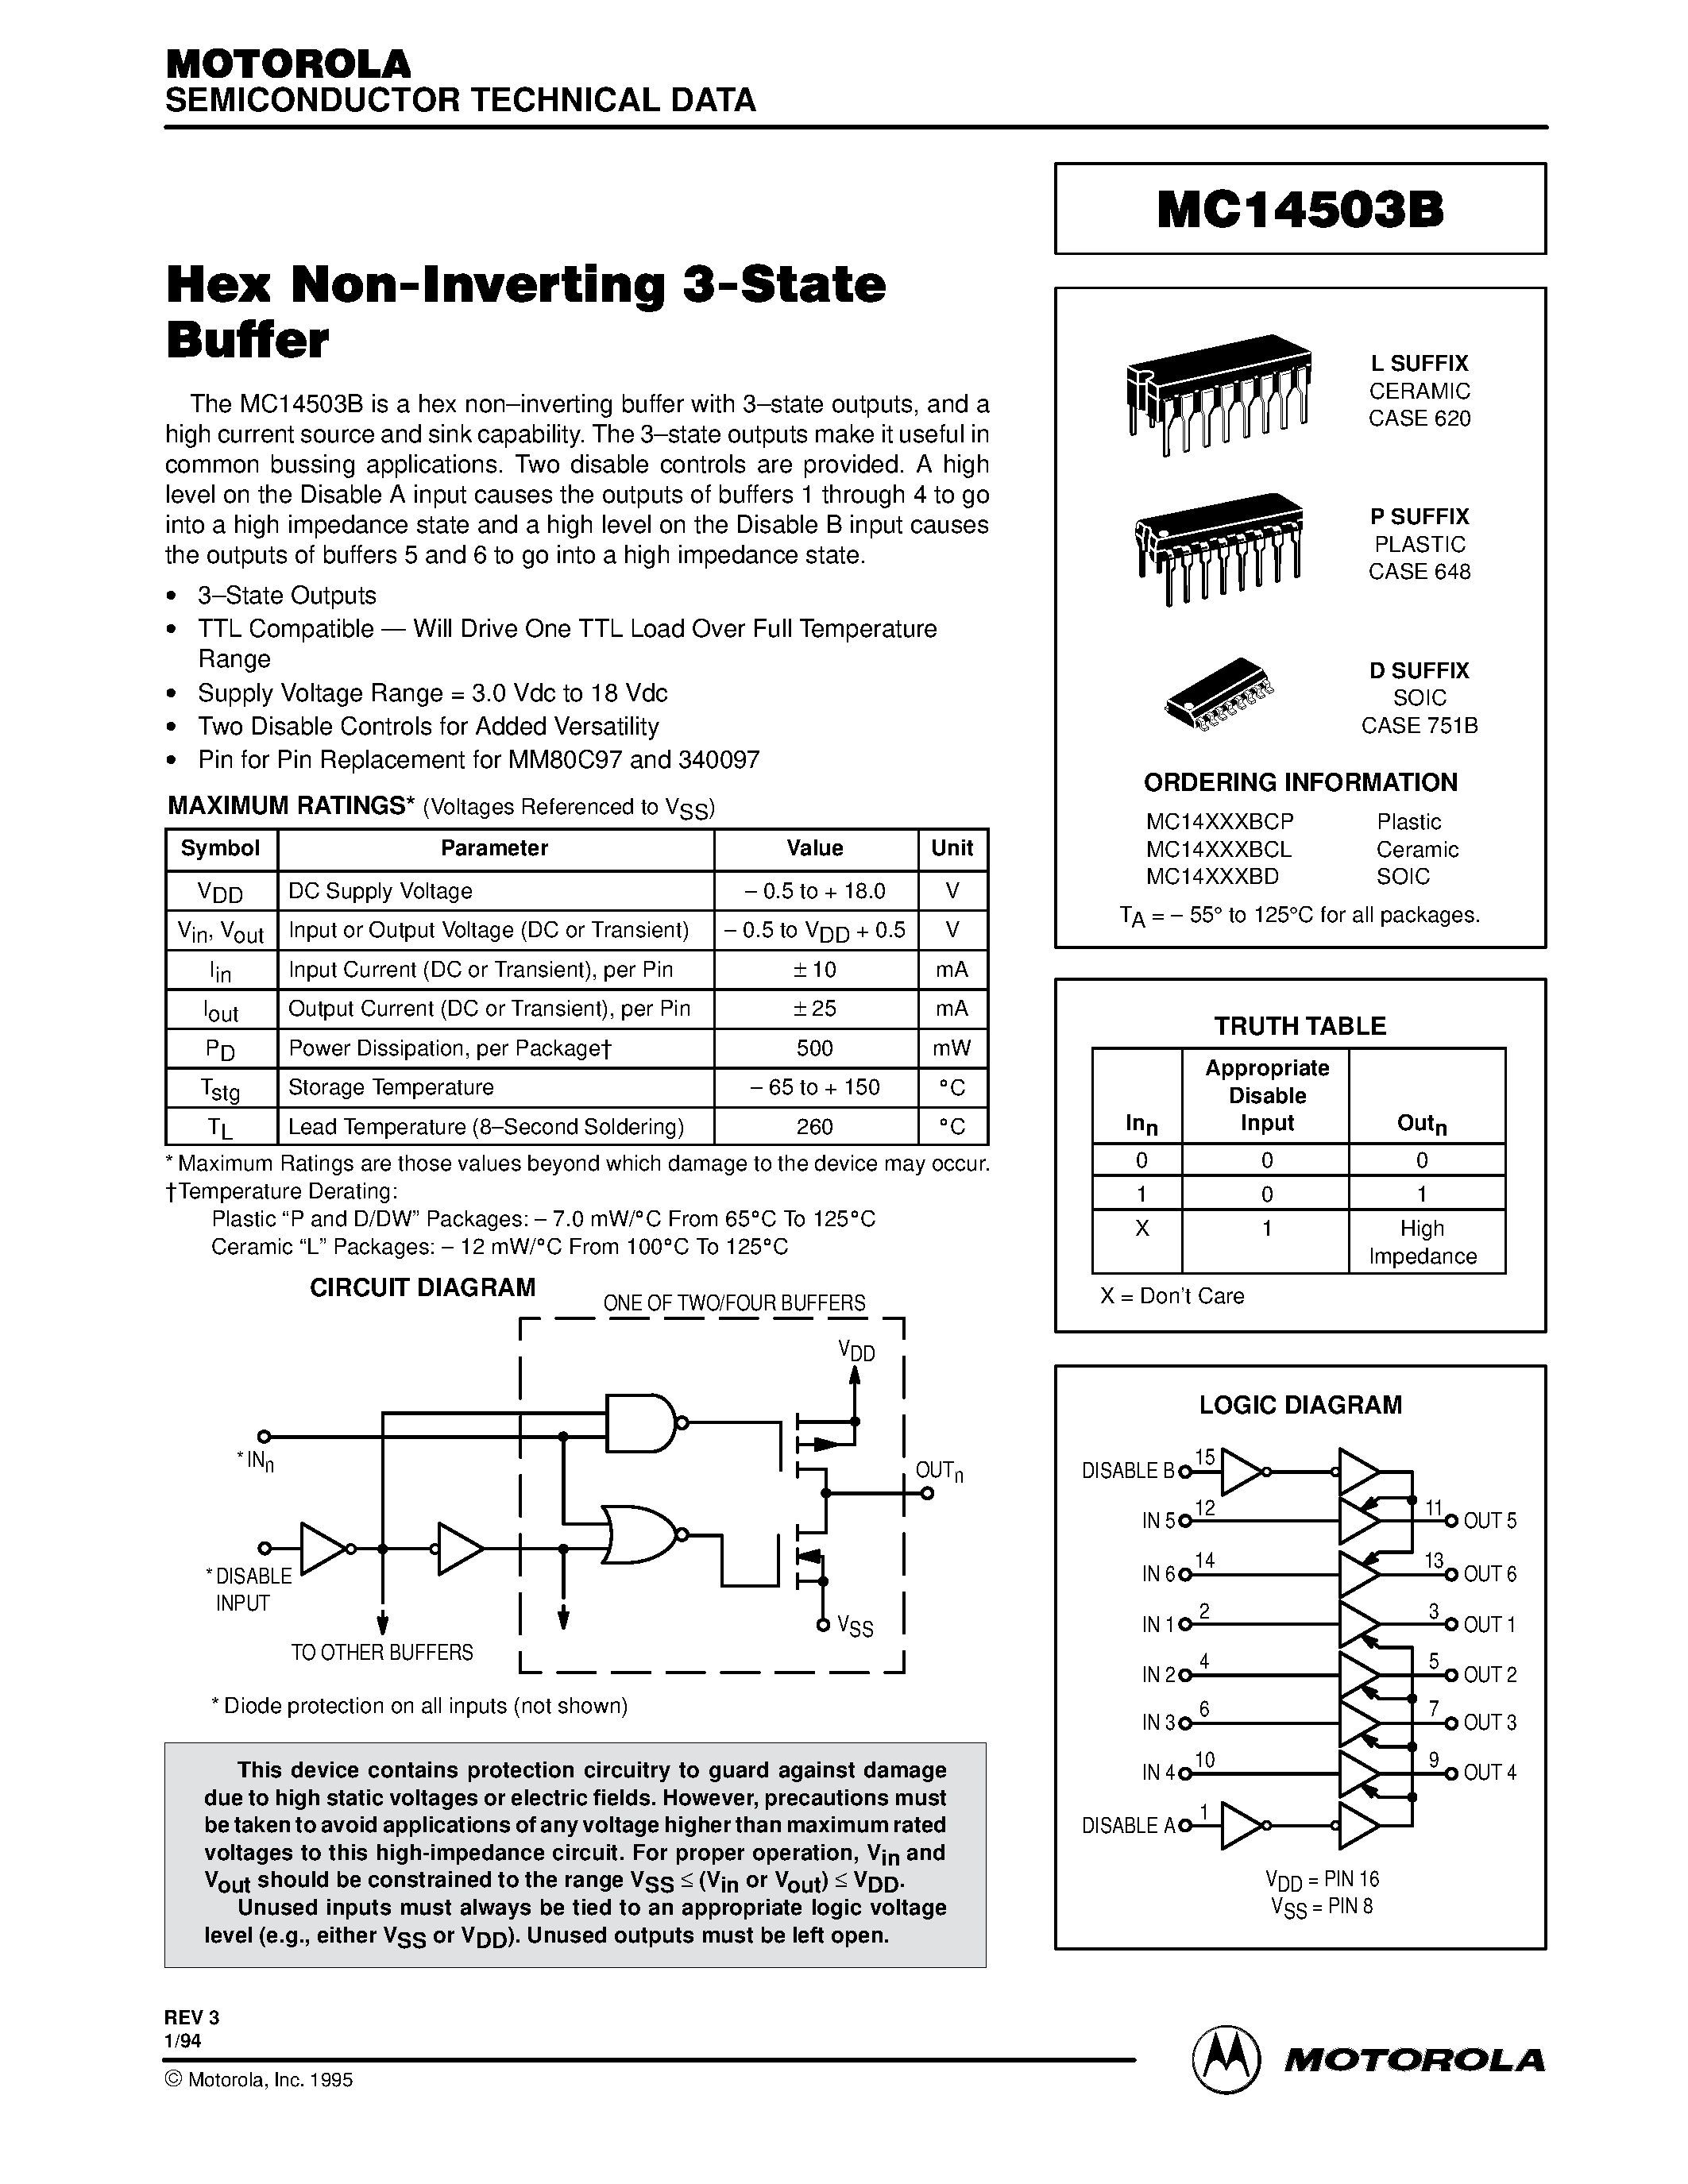 Datasheet MC14503BCL - Hex Non-Inverting 3-State Buffer page 1